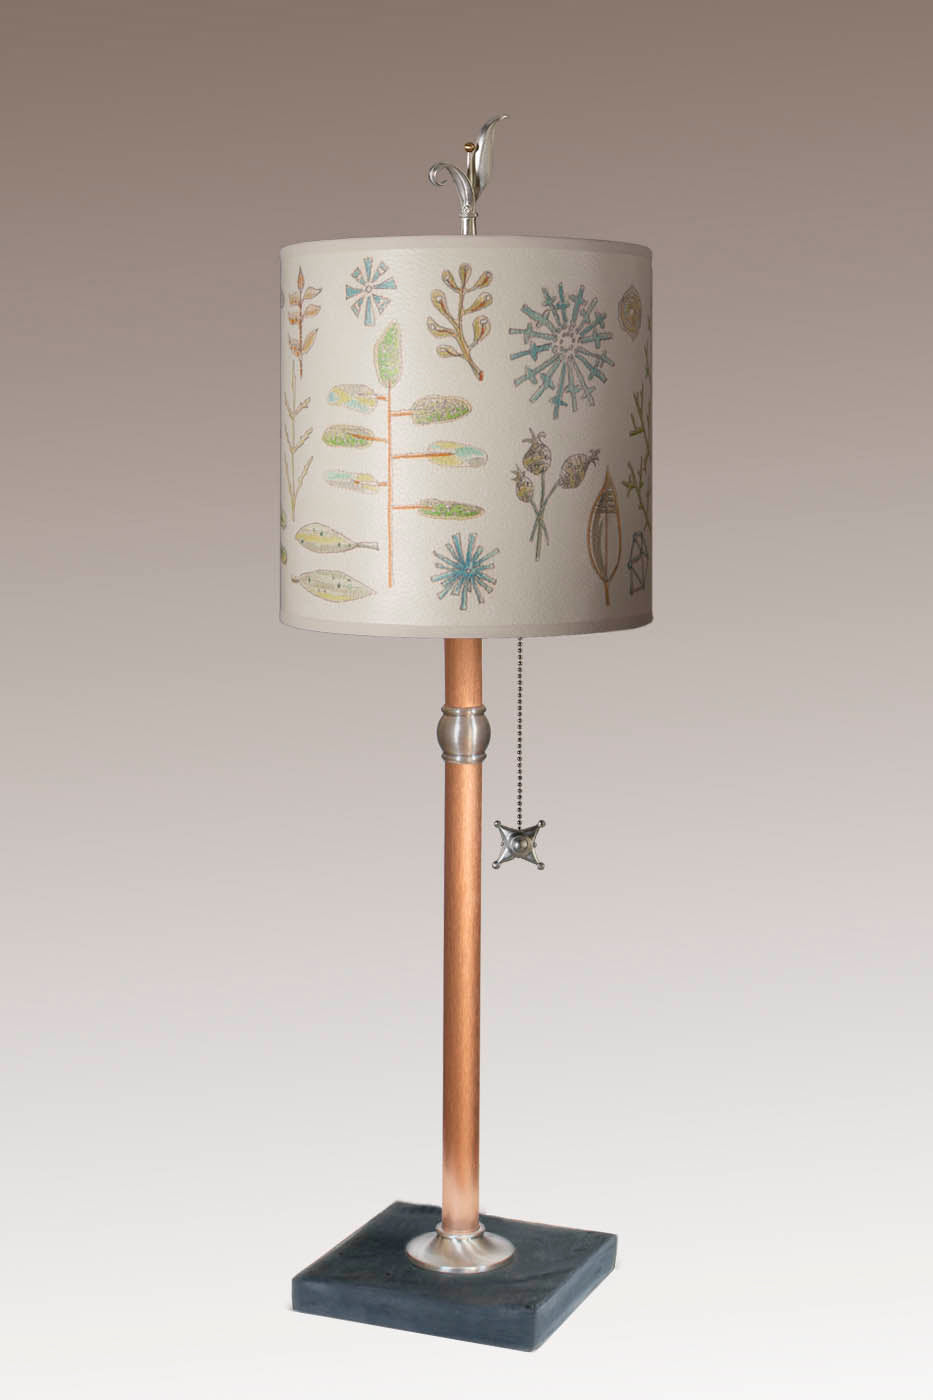 Janna Ugone & Co Table Lamp Copper Table Lamp with Medium Drum Shade in Field Chart